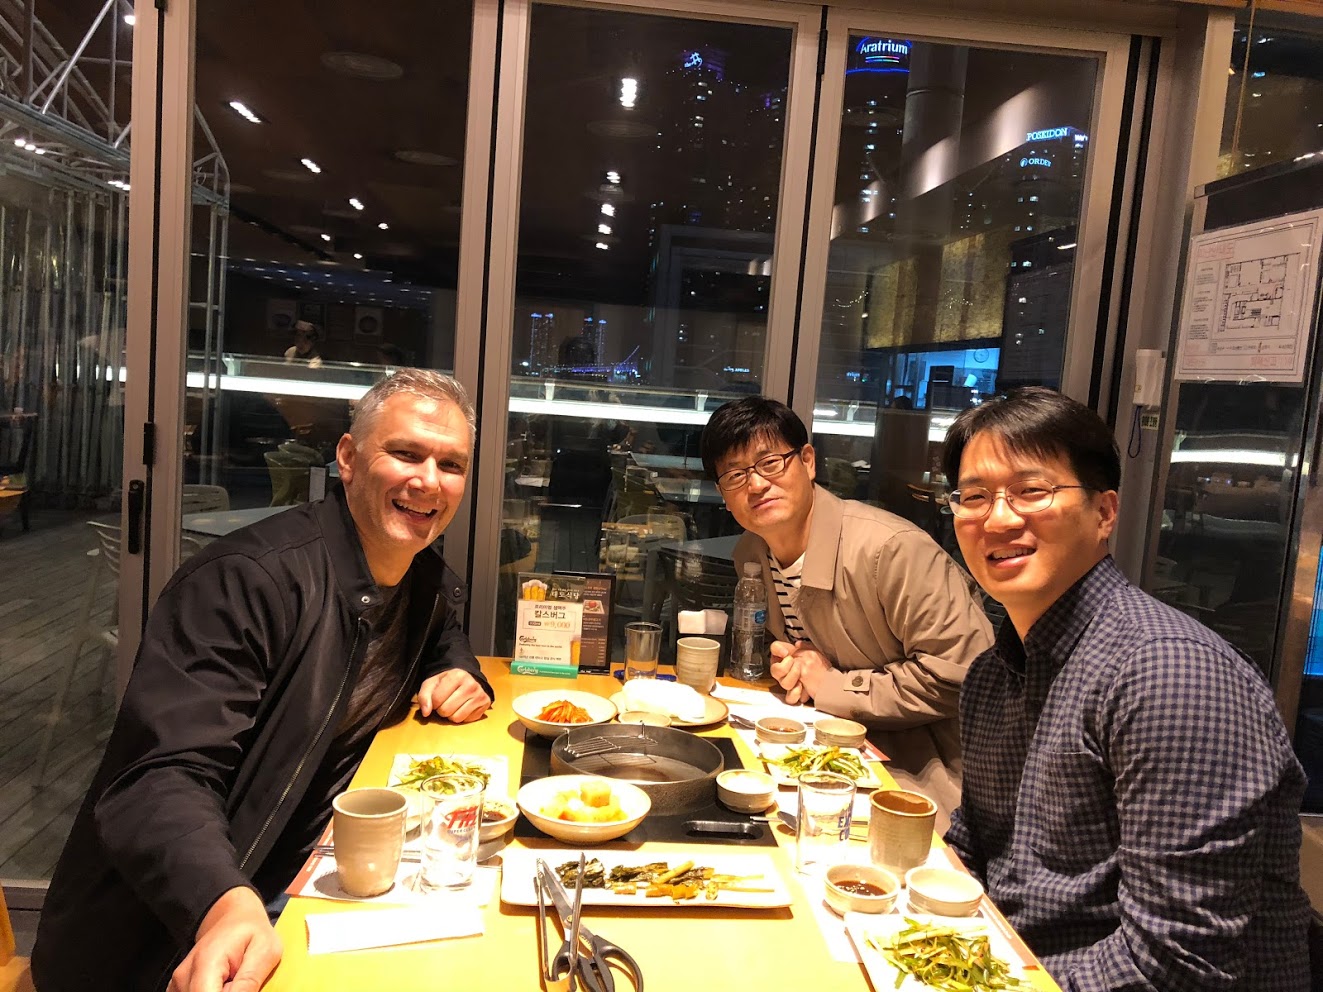 Dinner with Jaekwang and Hosung.